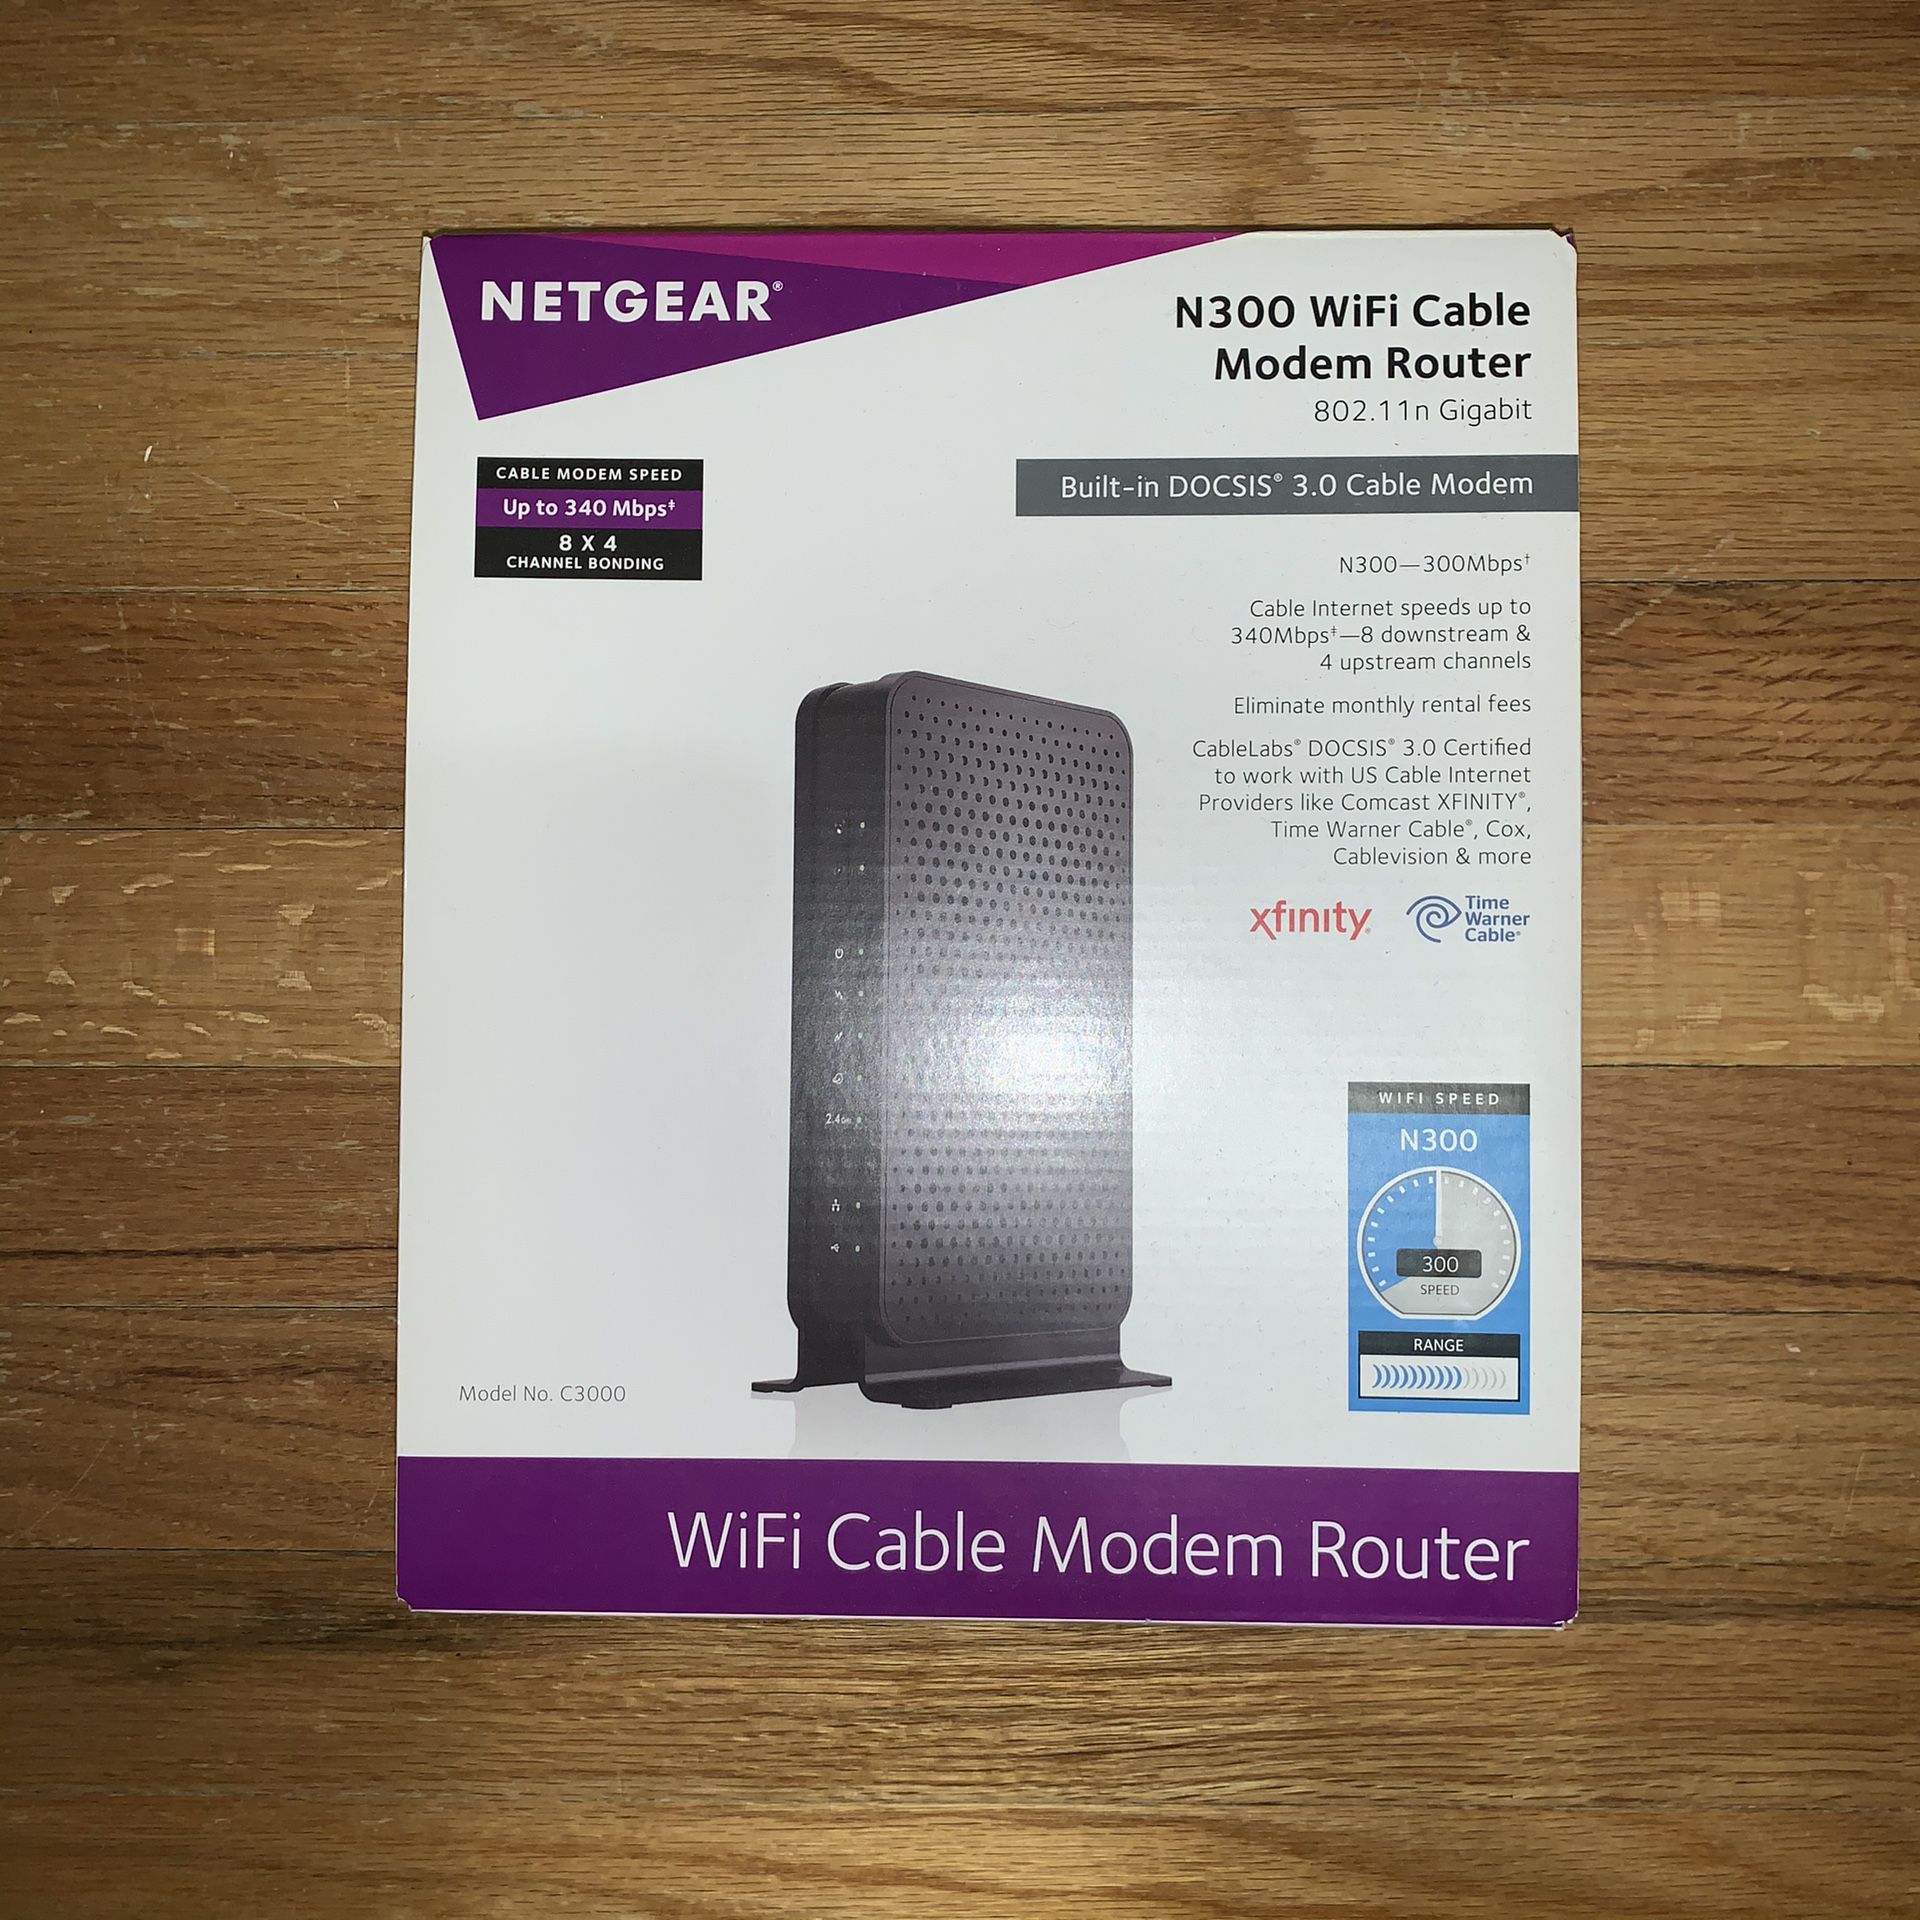 NETGEAR N300 Wi-Fi Cable Modem Router